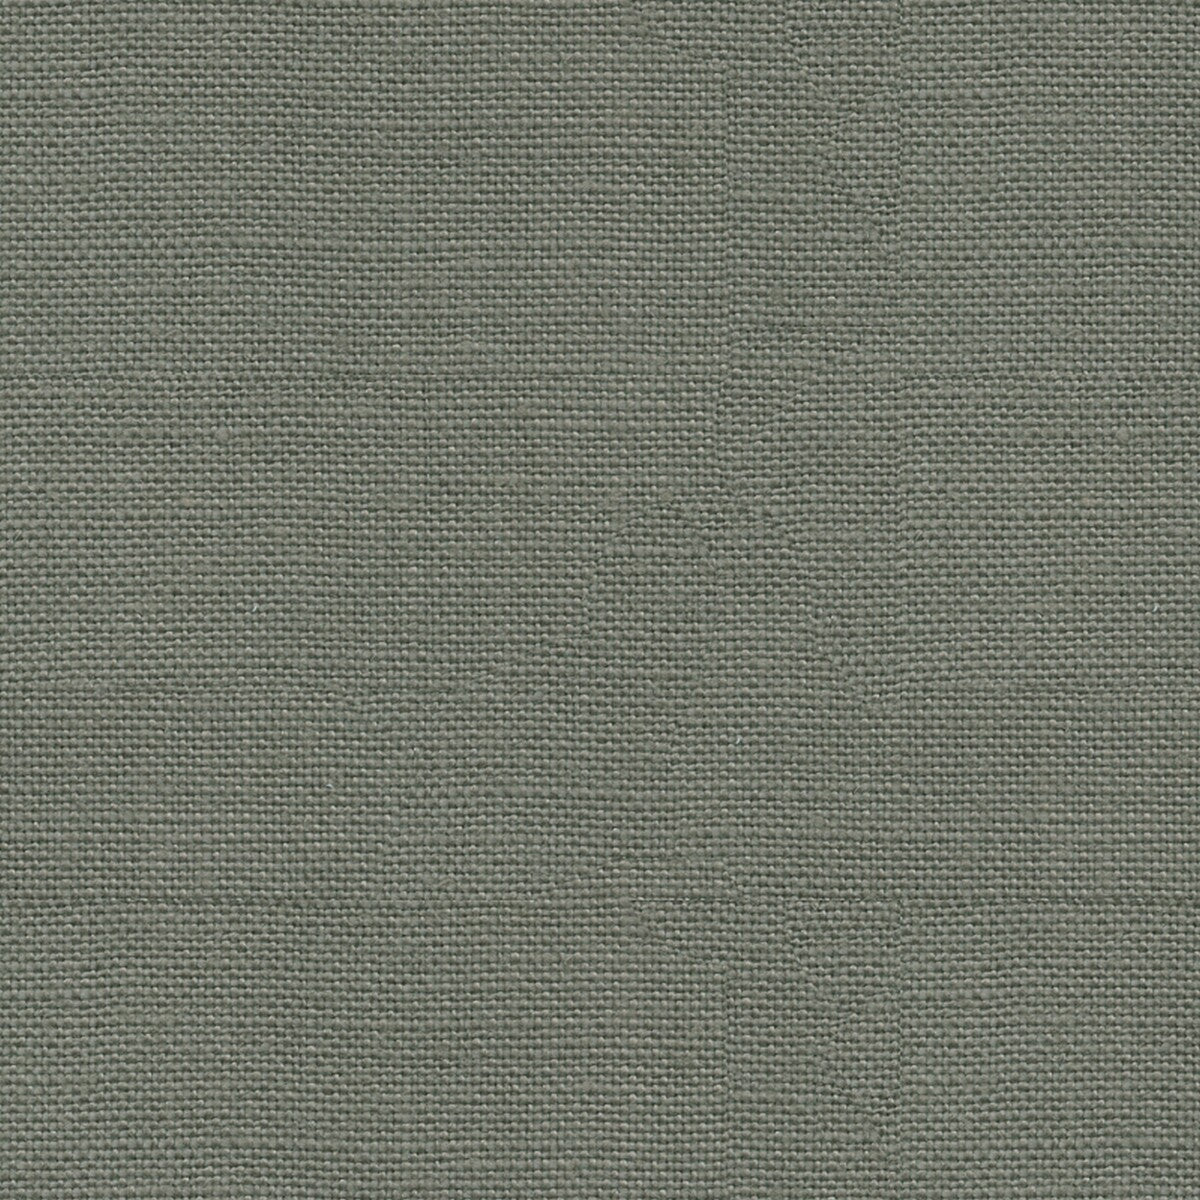 Lea fabric in pewter color - pattern J0337.945.0 - by G P &amp; J Baker in the Crayford collection